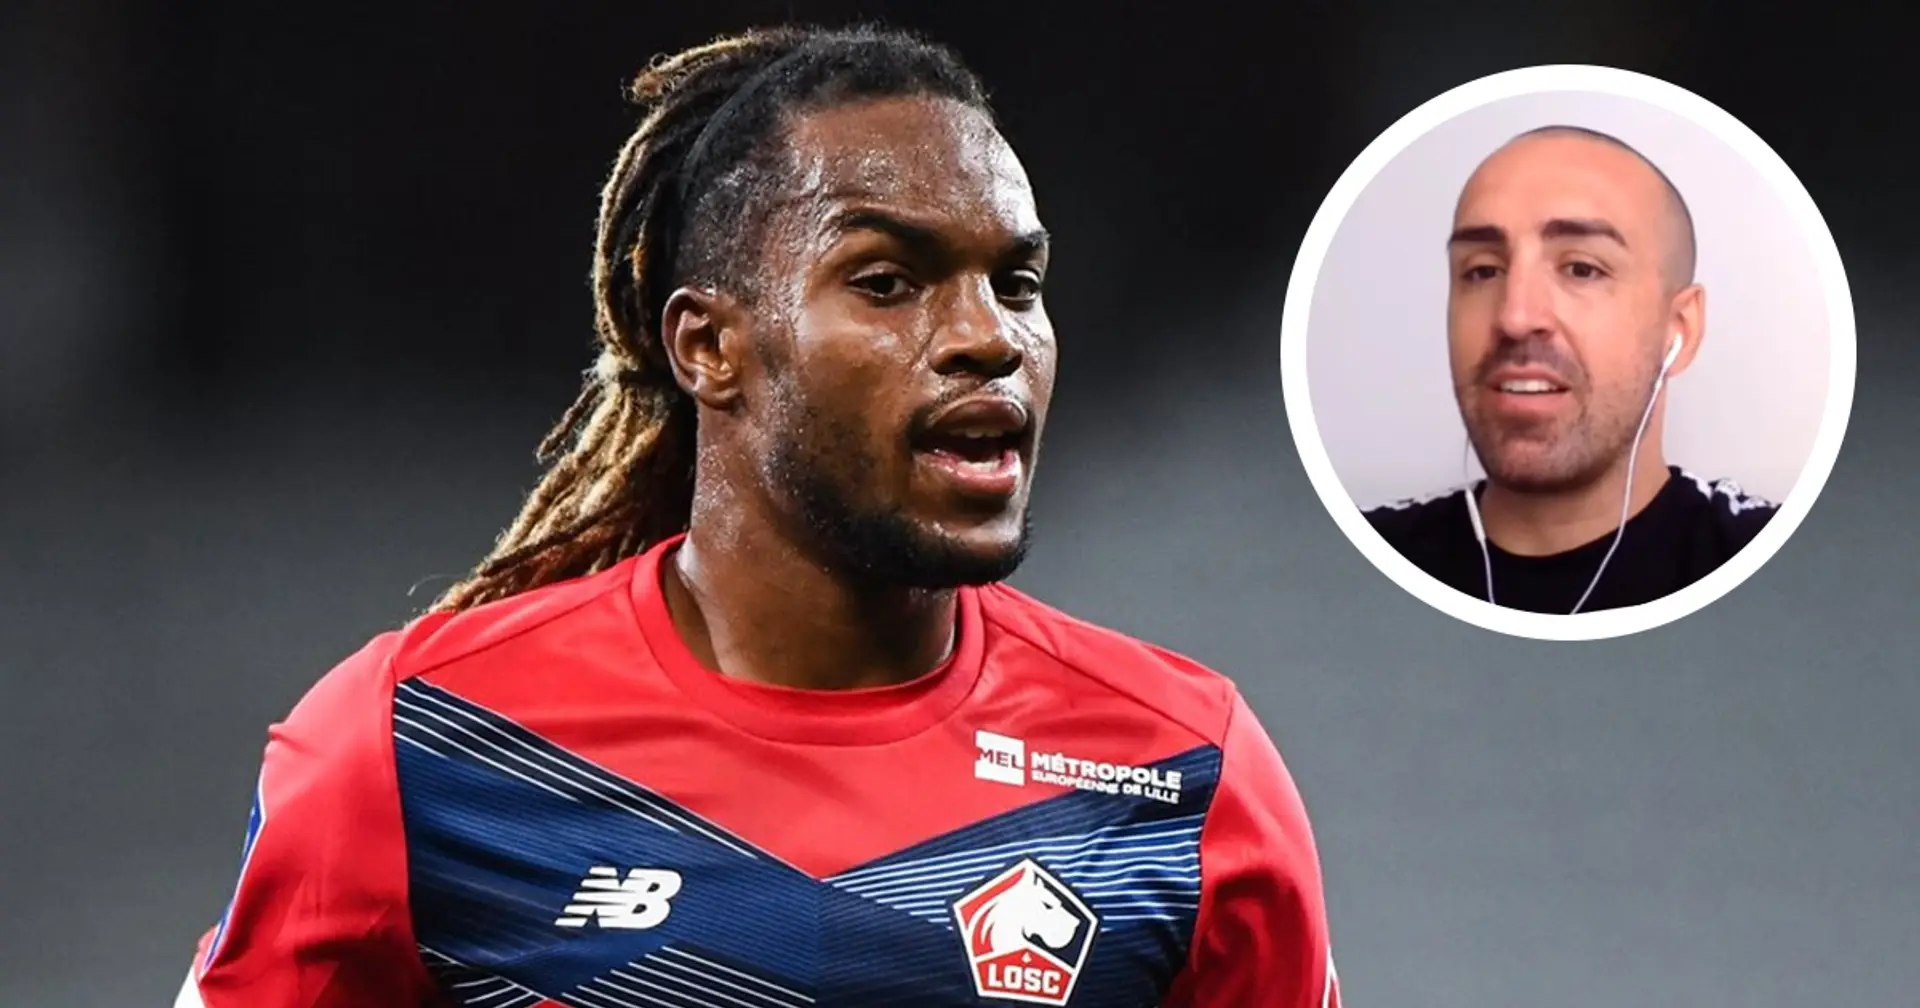 'He could be a great signing': Jose Enrique encourages Liverpool to go for Renato Sanches